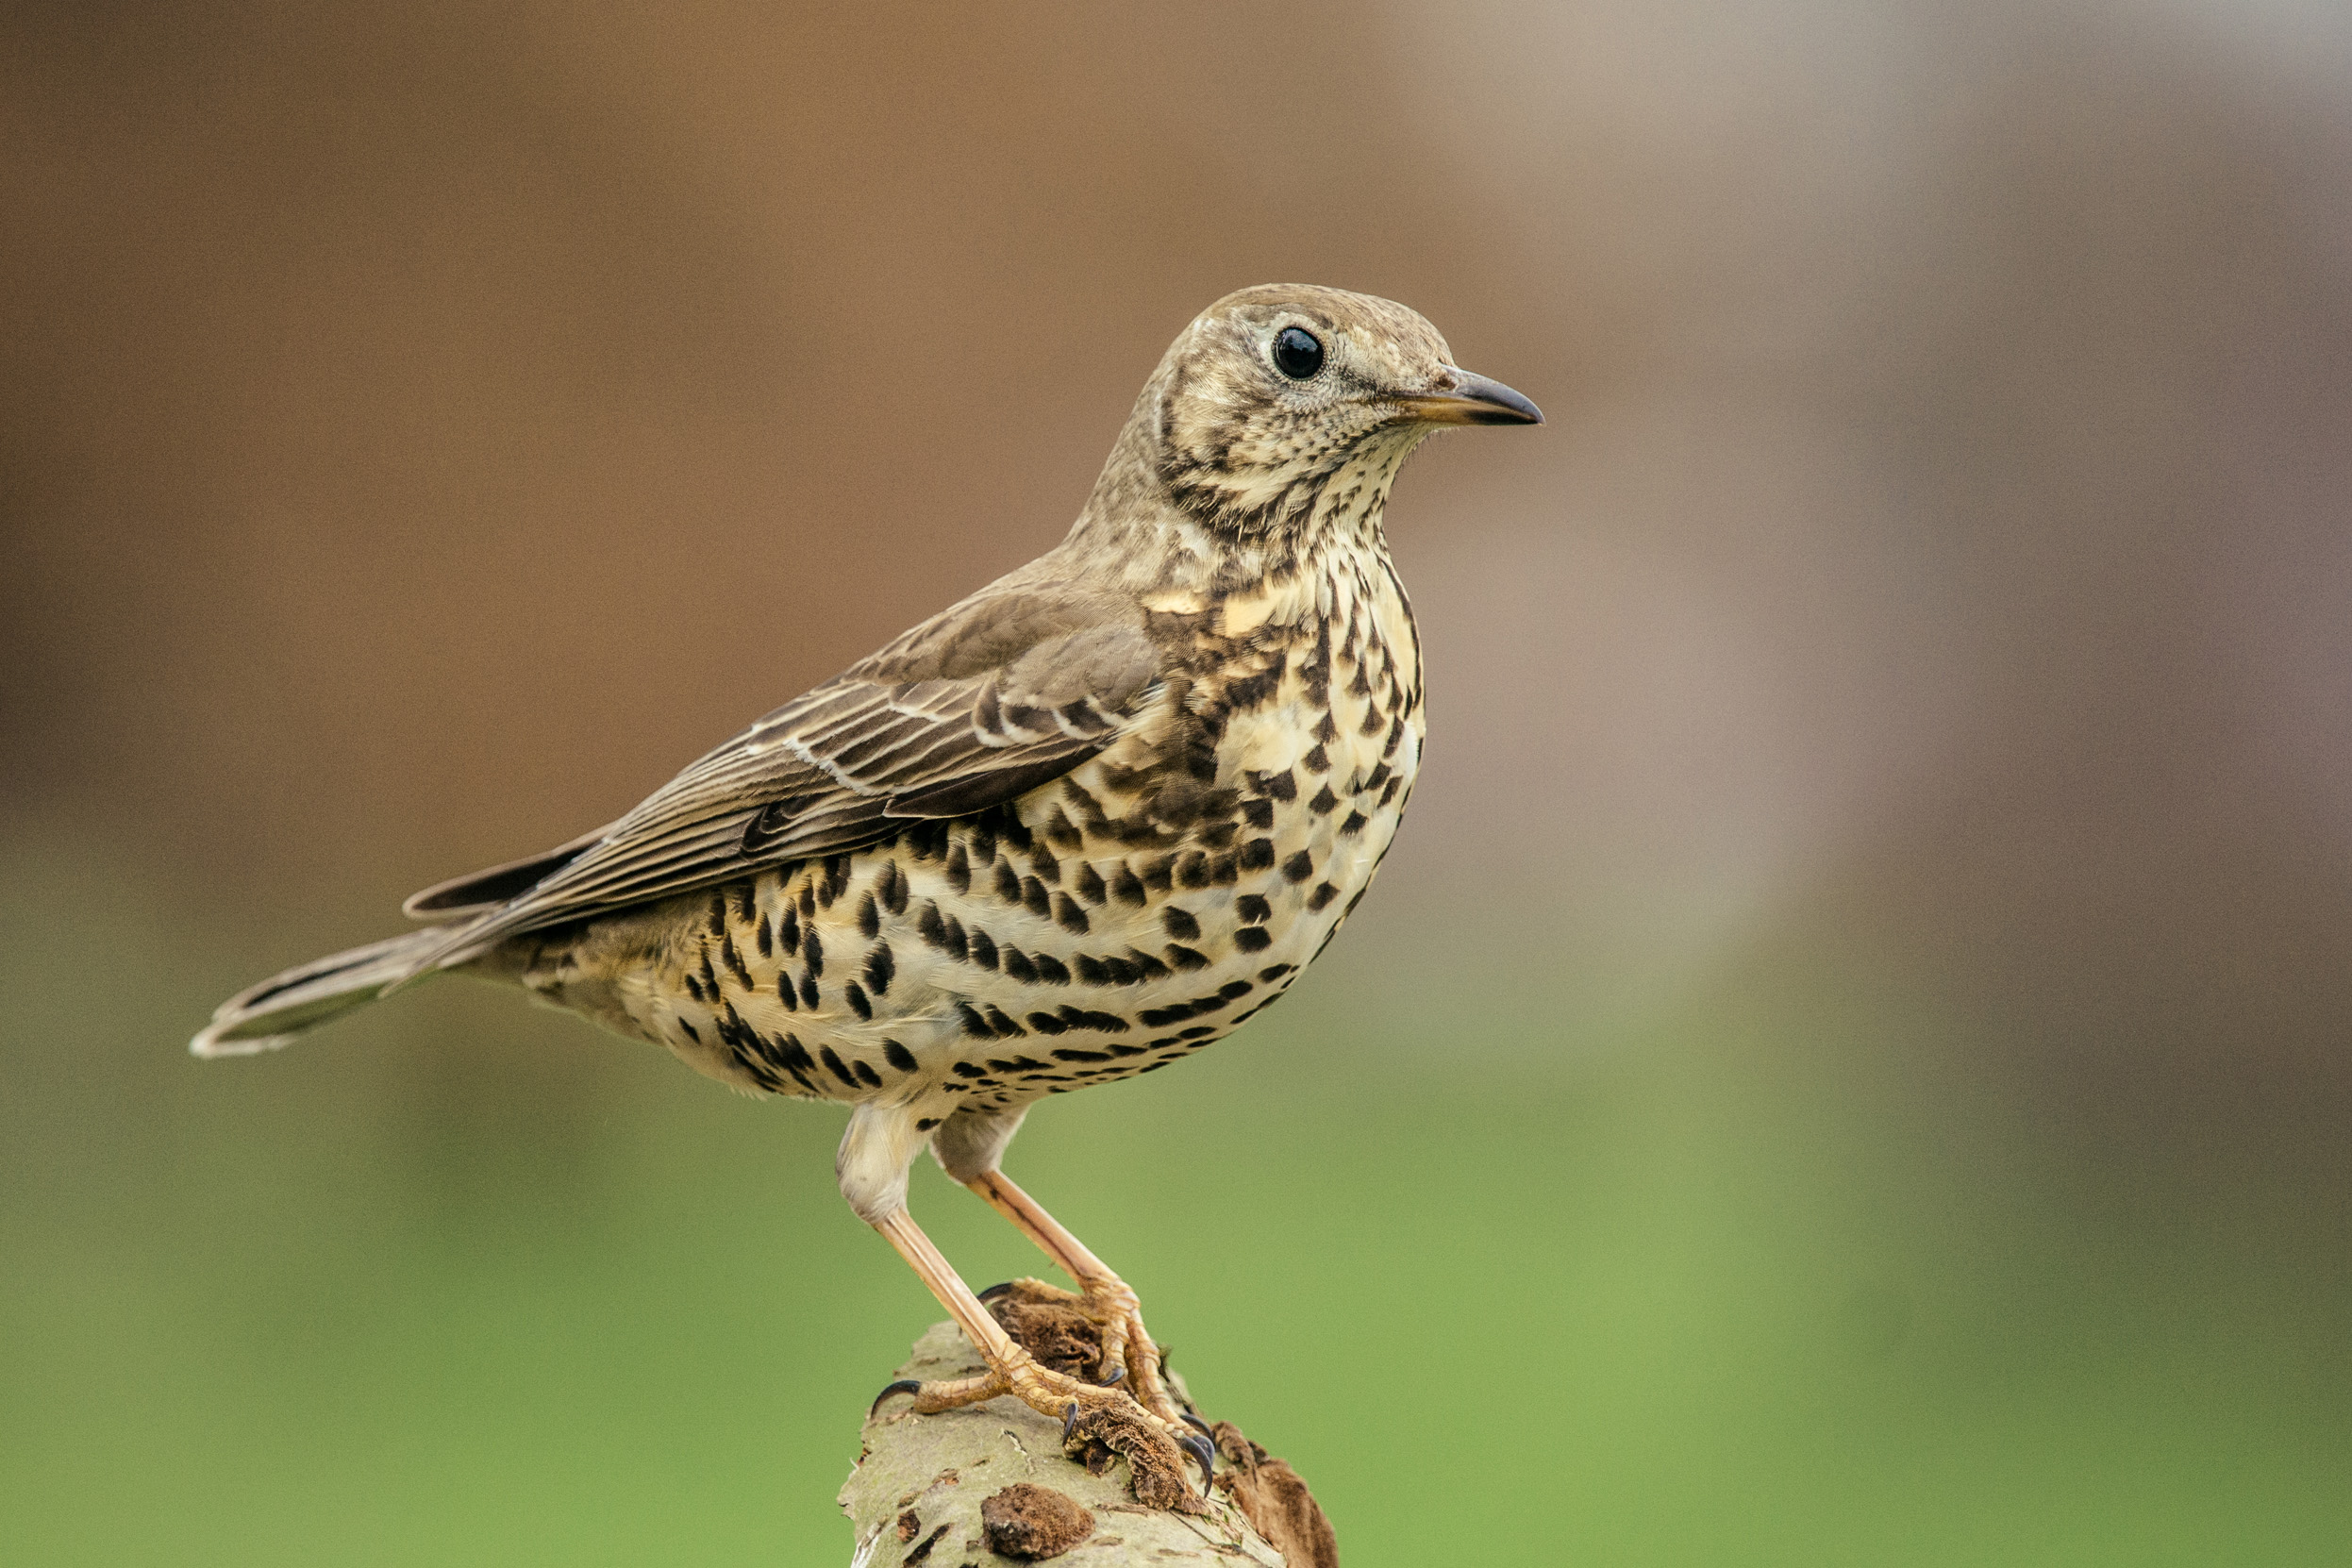 A lone Mistle Thrush perched upon a log.